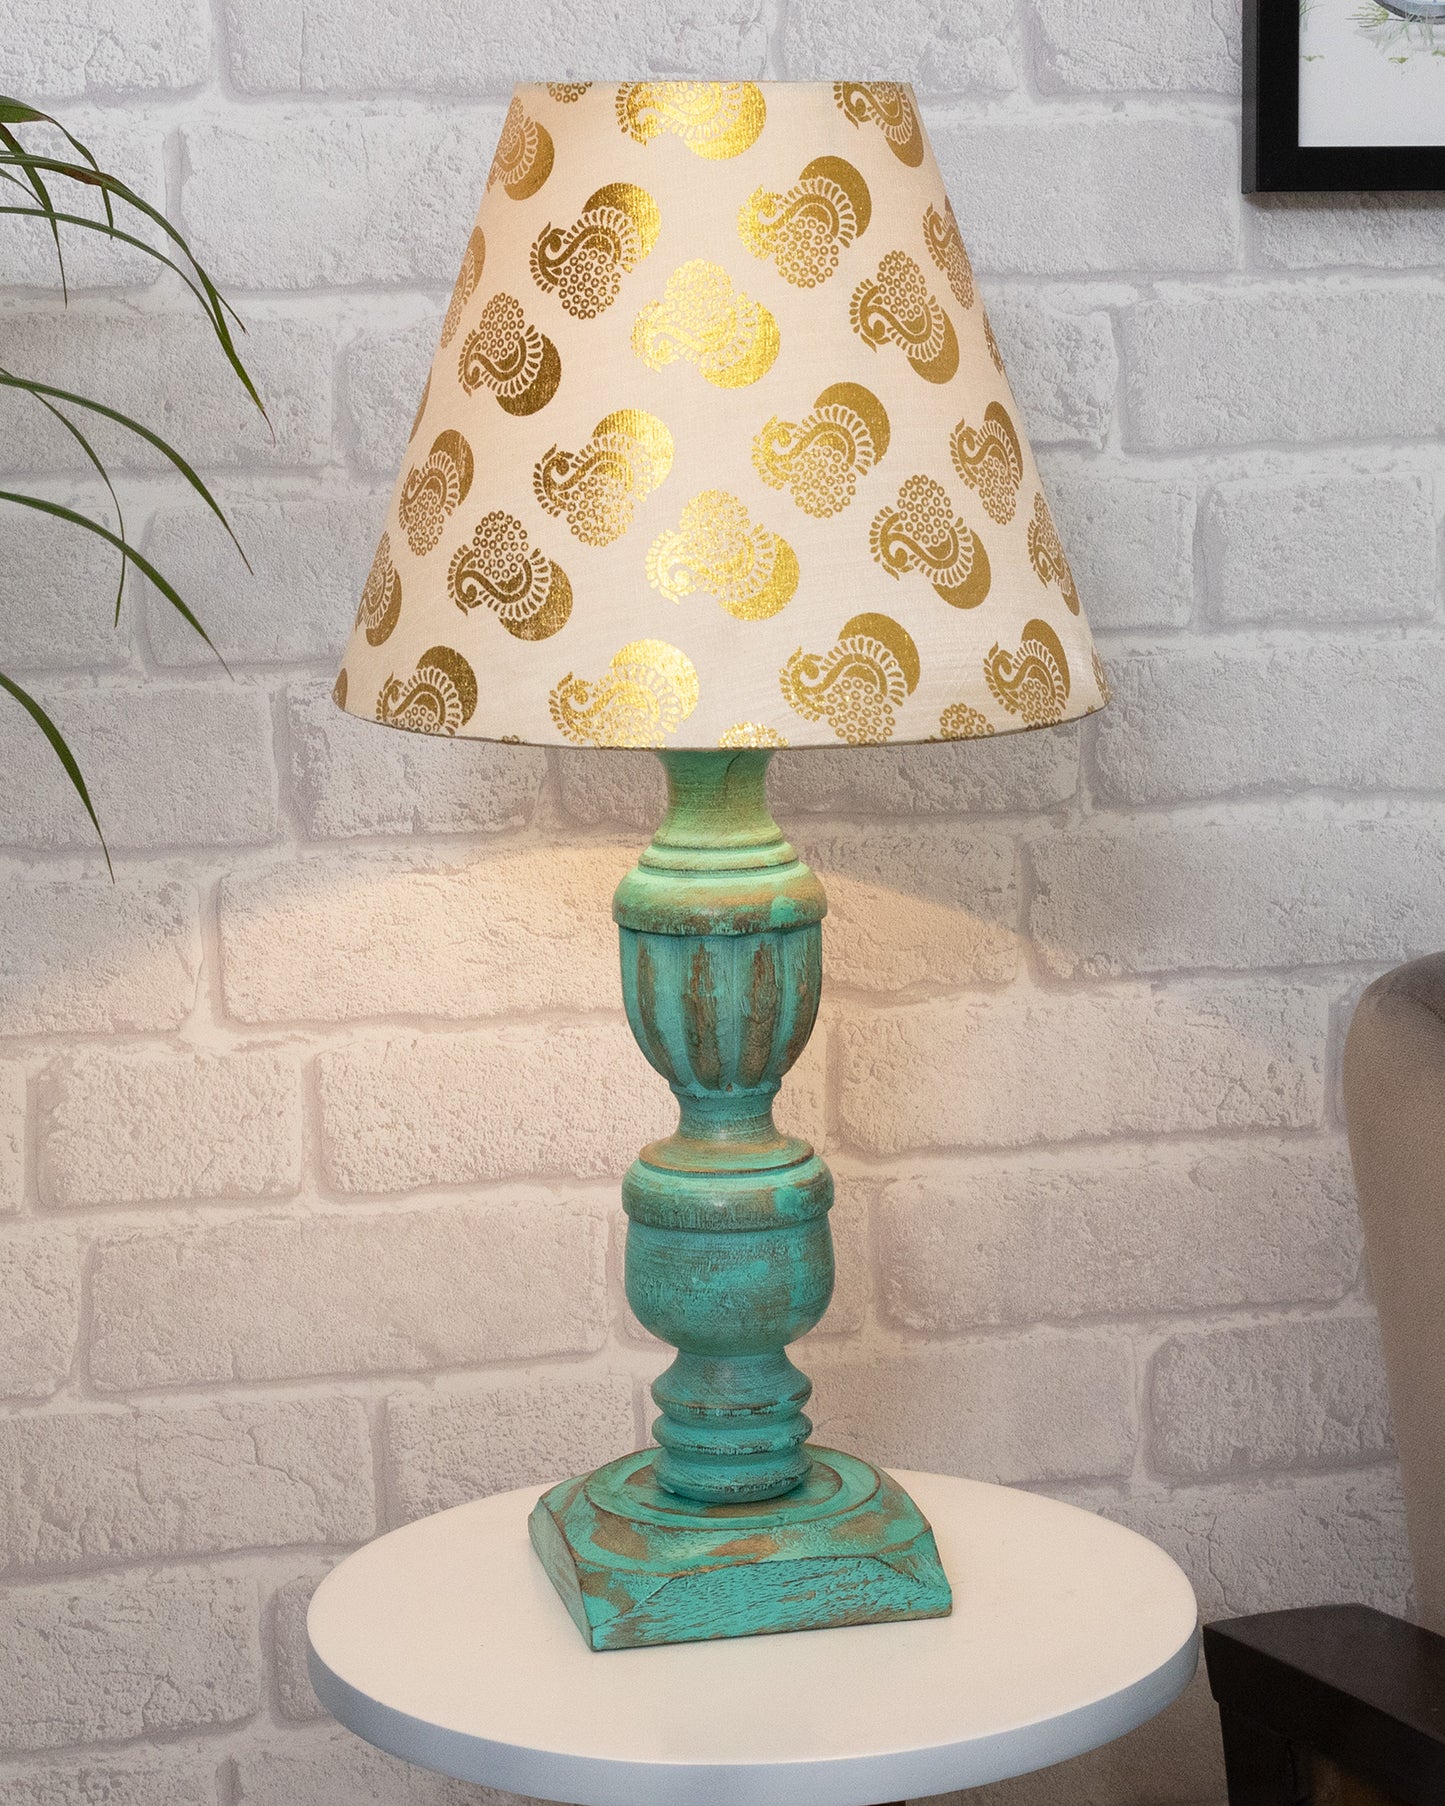 Rustic Algae French Trophy Carved Table lamp with Empire Cone Shade